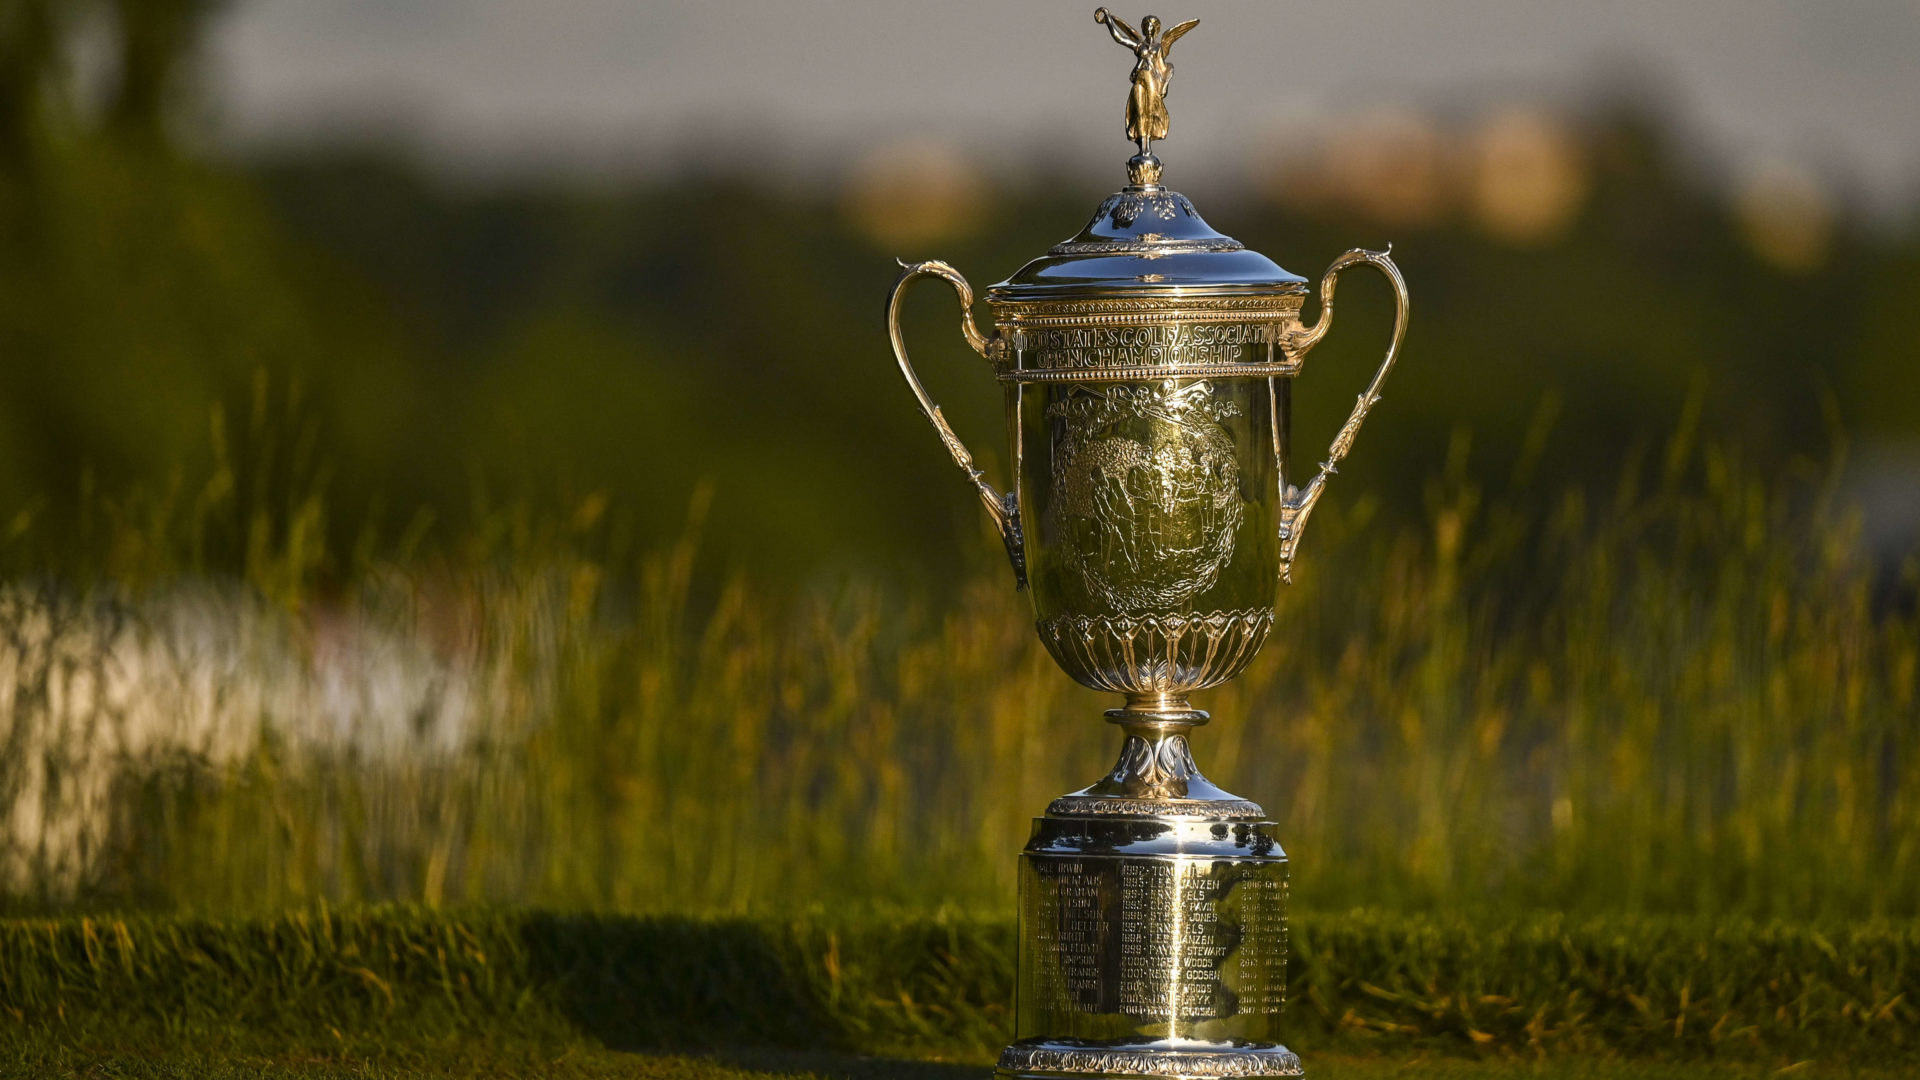 BROOKLINE, MA - JUNE 13: The U.S. Open trophy at sunset during practice for the U.S. Open at The Country Club on June 13, 2022 in Brookline, Massachusetts. (Photo by Keyur Khamar/PGA TOUR via Getty Images)